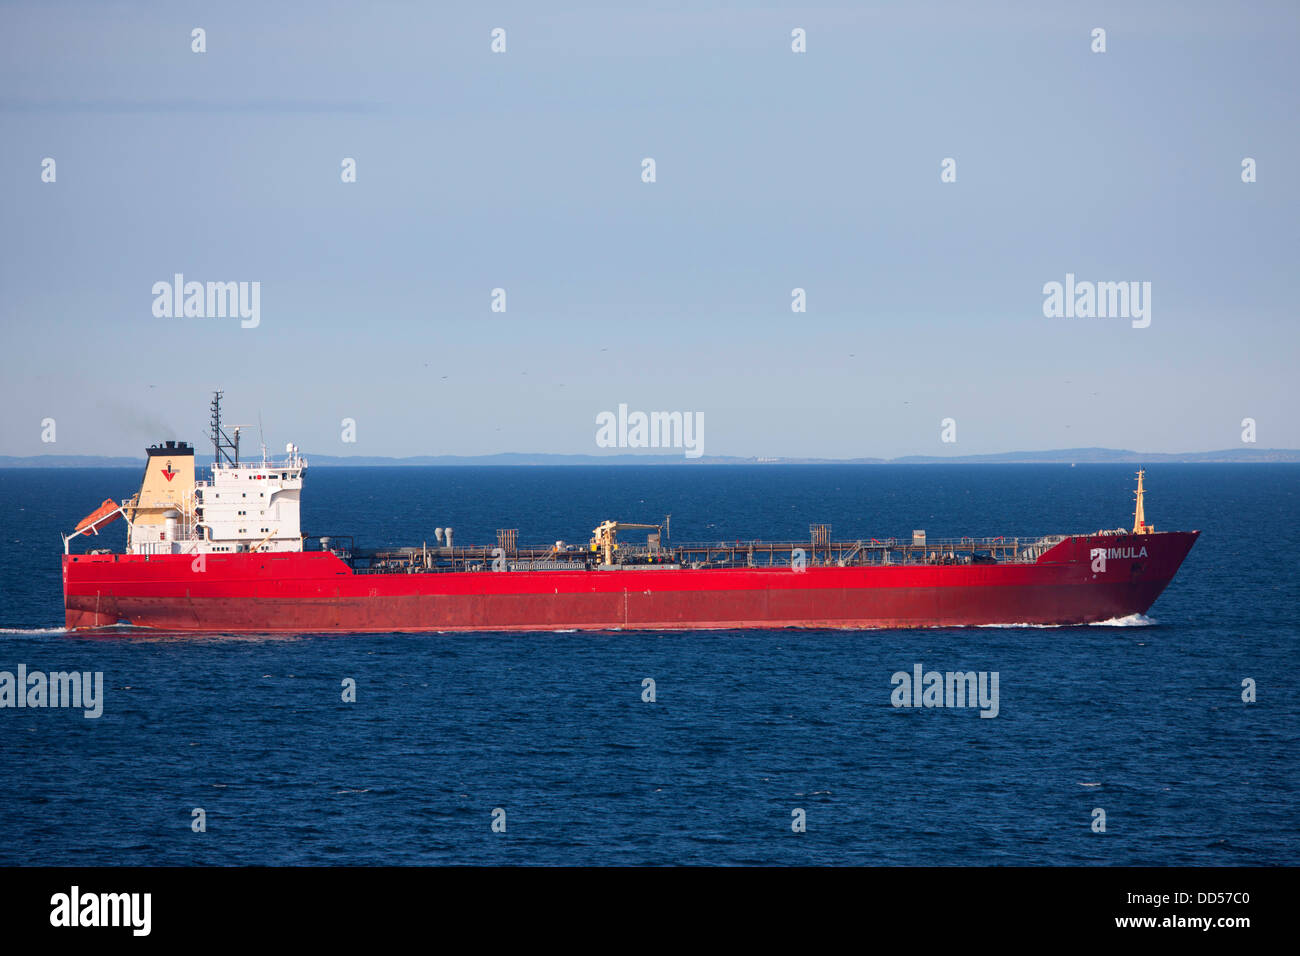 Primula bulker merchant ship transporting Oil and chemical tanker cargo in Baltic sea Stock Photo